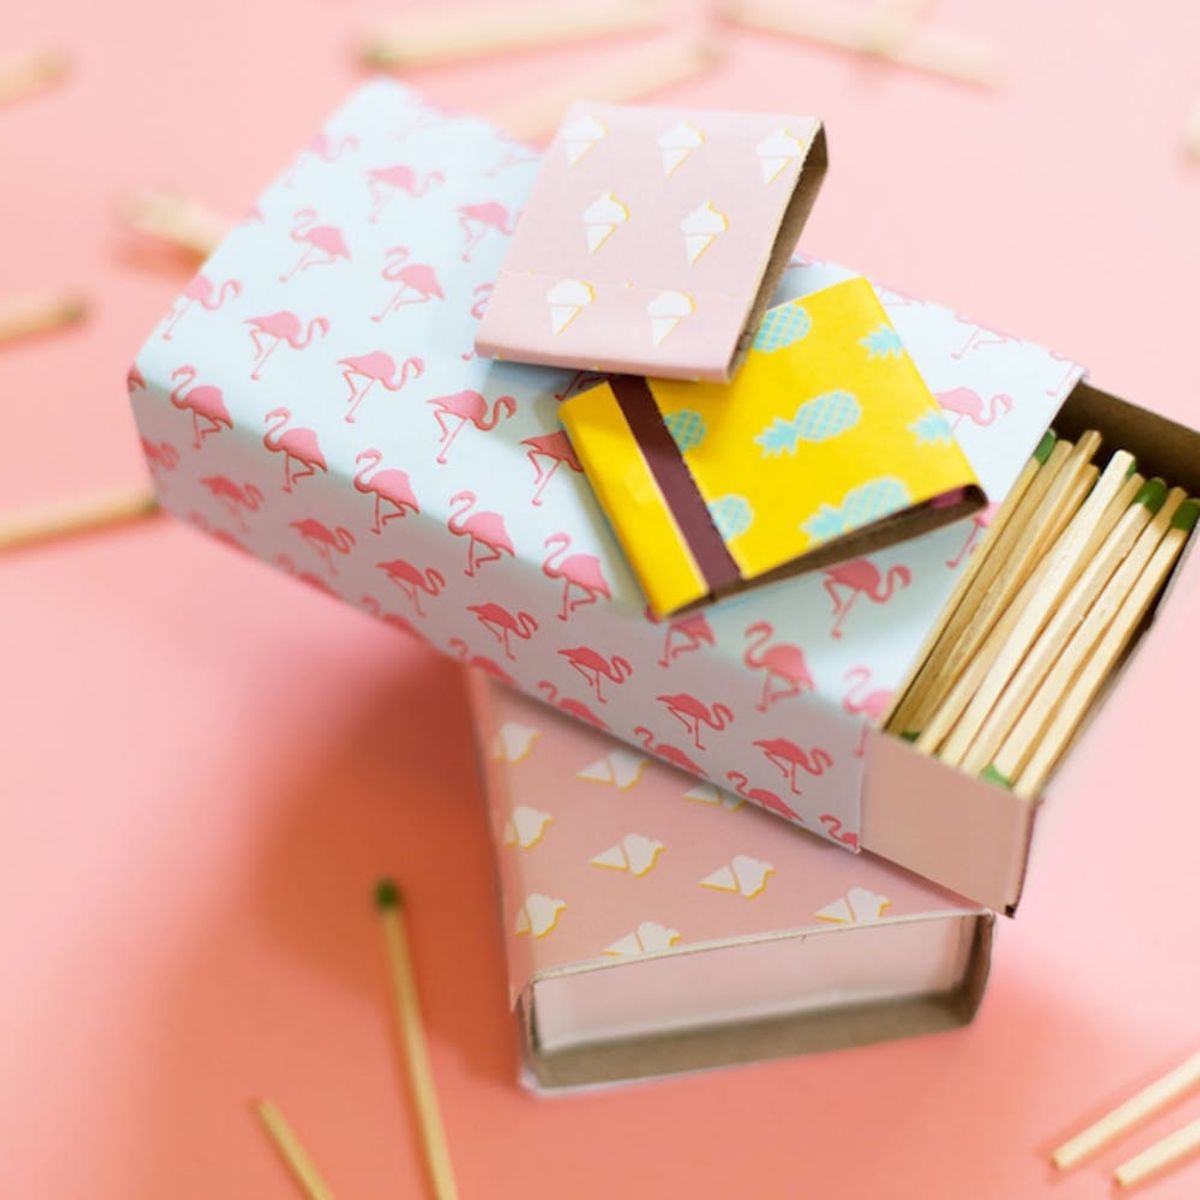 What to Make This Weekend: Patterned Matchboxes, Lisa Frank Donuts + More